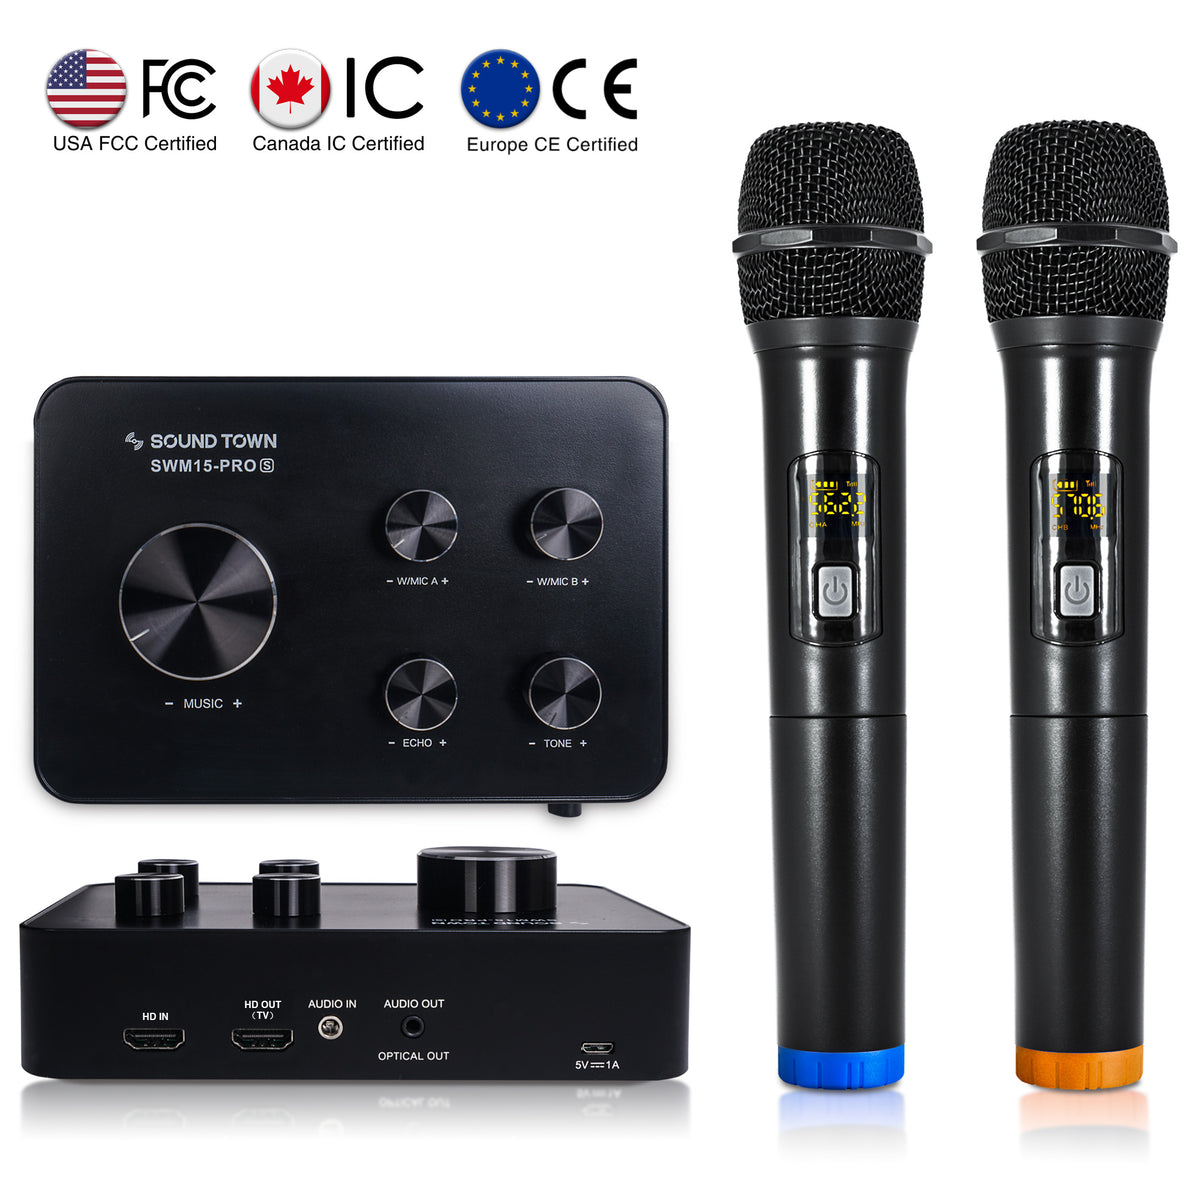 DIGITNOW! Portable Karaoke Microphone Mixer System with Dual UHF Wireless  Mic, HDMI/Optical/AUX for Smart TV, PC, KTV, Home Theater, Amplifier,  Speaker